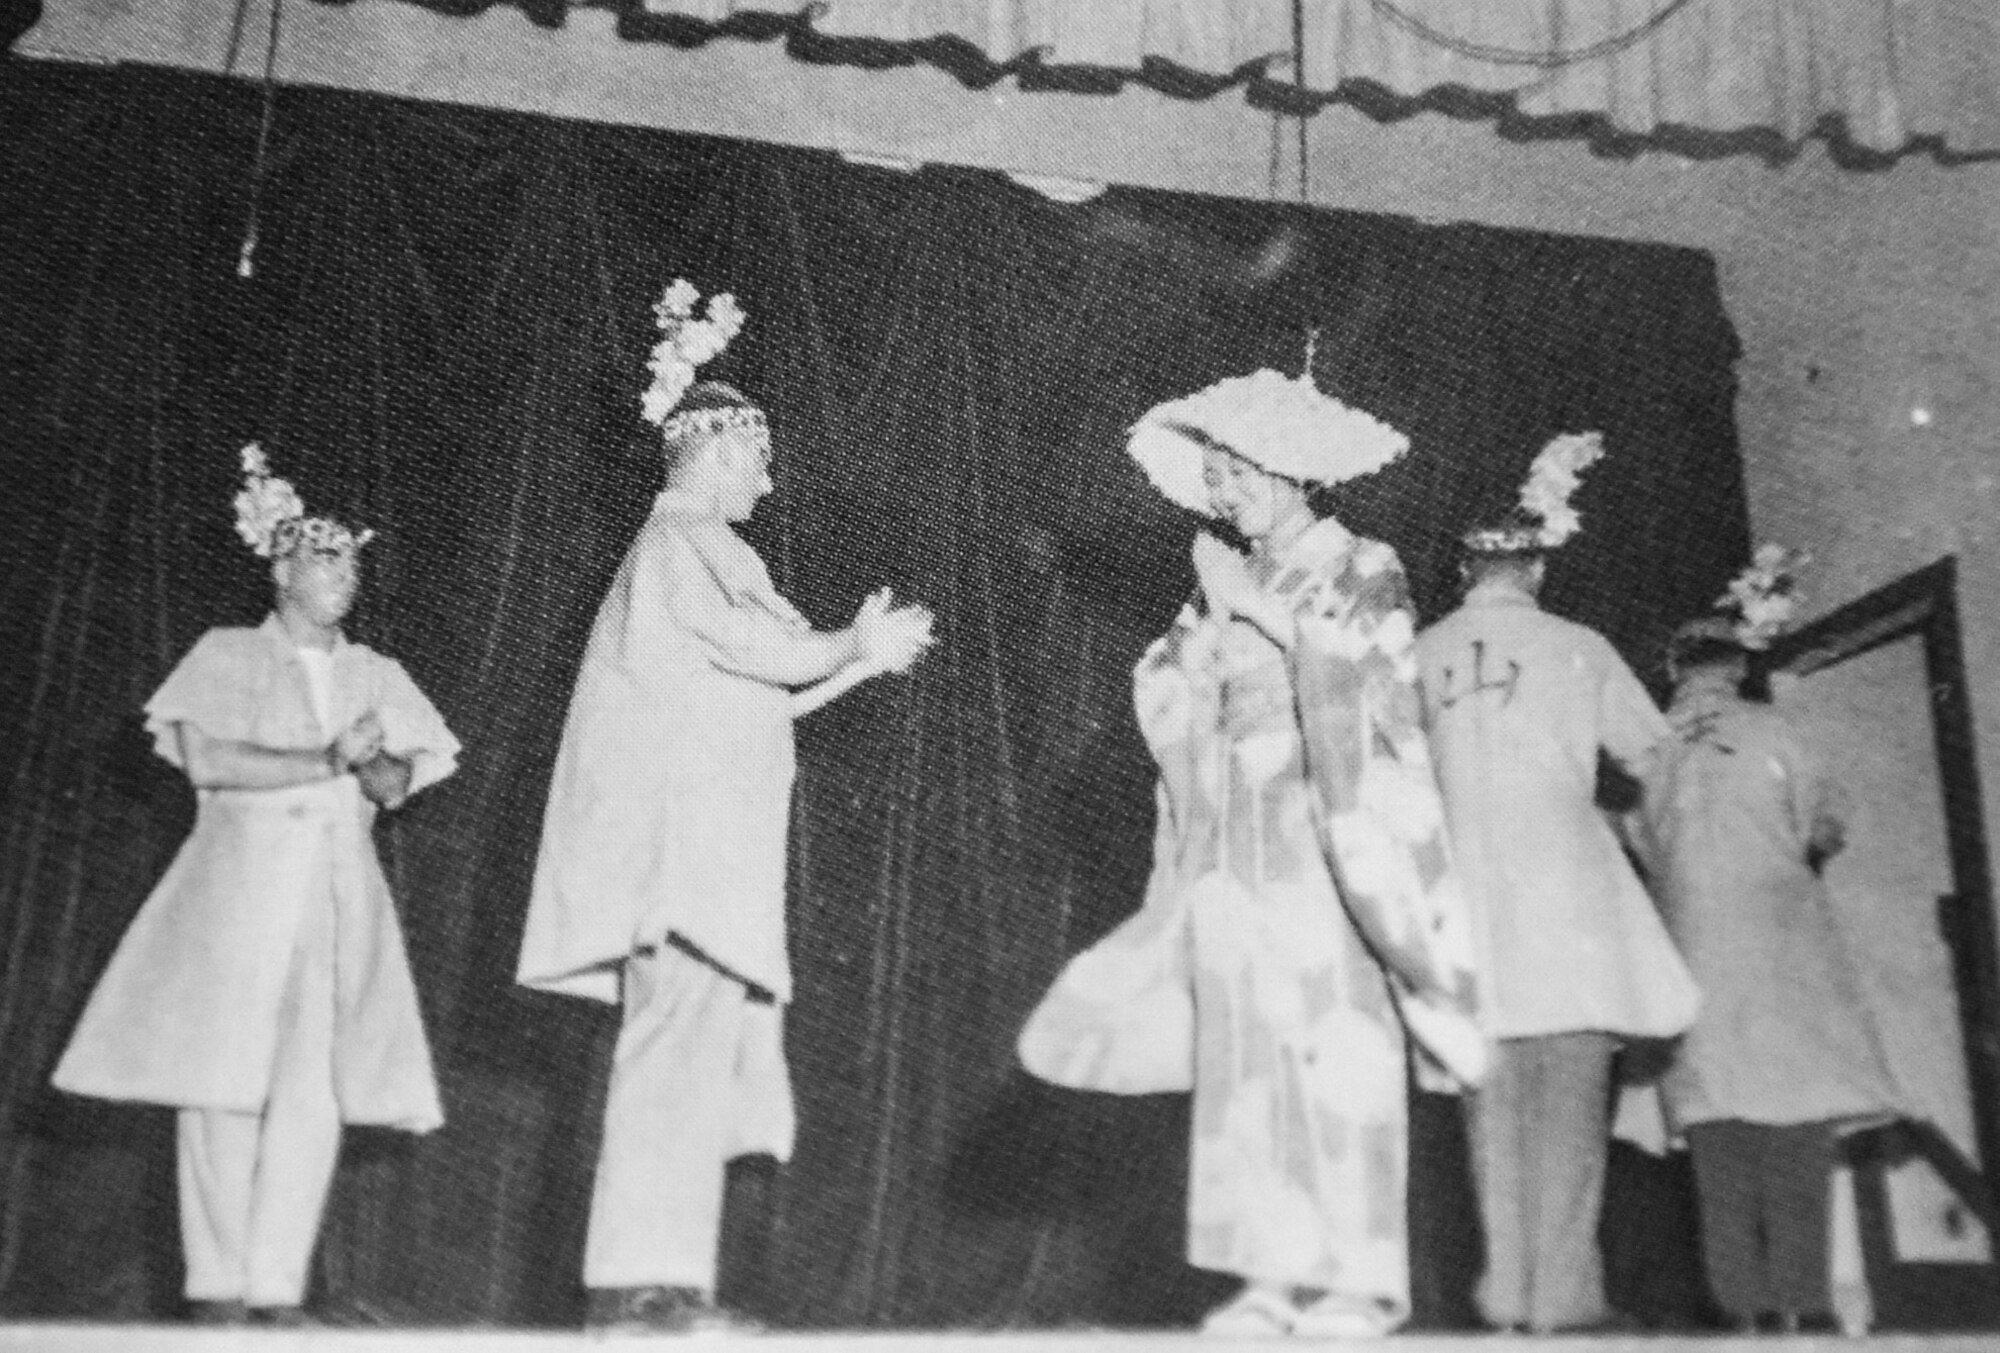 Students perform a Japanese dance called, “Dance of the Coal Miners,” on April 25, 1952, during the Army Language School Festival, Presideo of Monterey, California. The current Language Day evolved from this celebration of language and cultures.